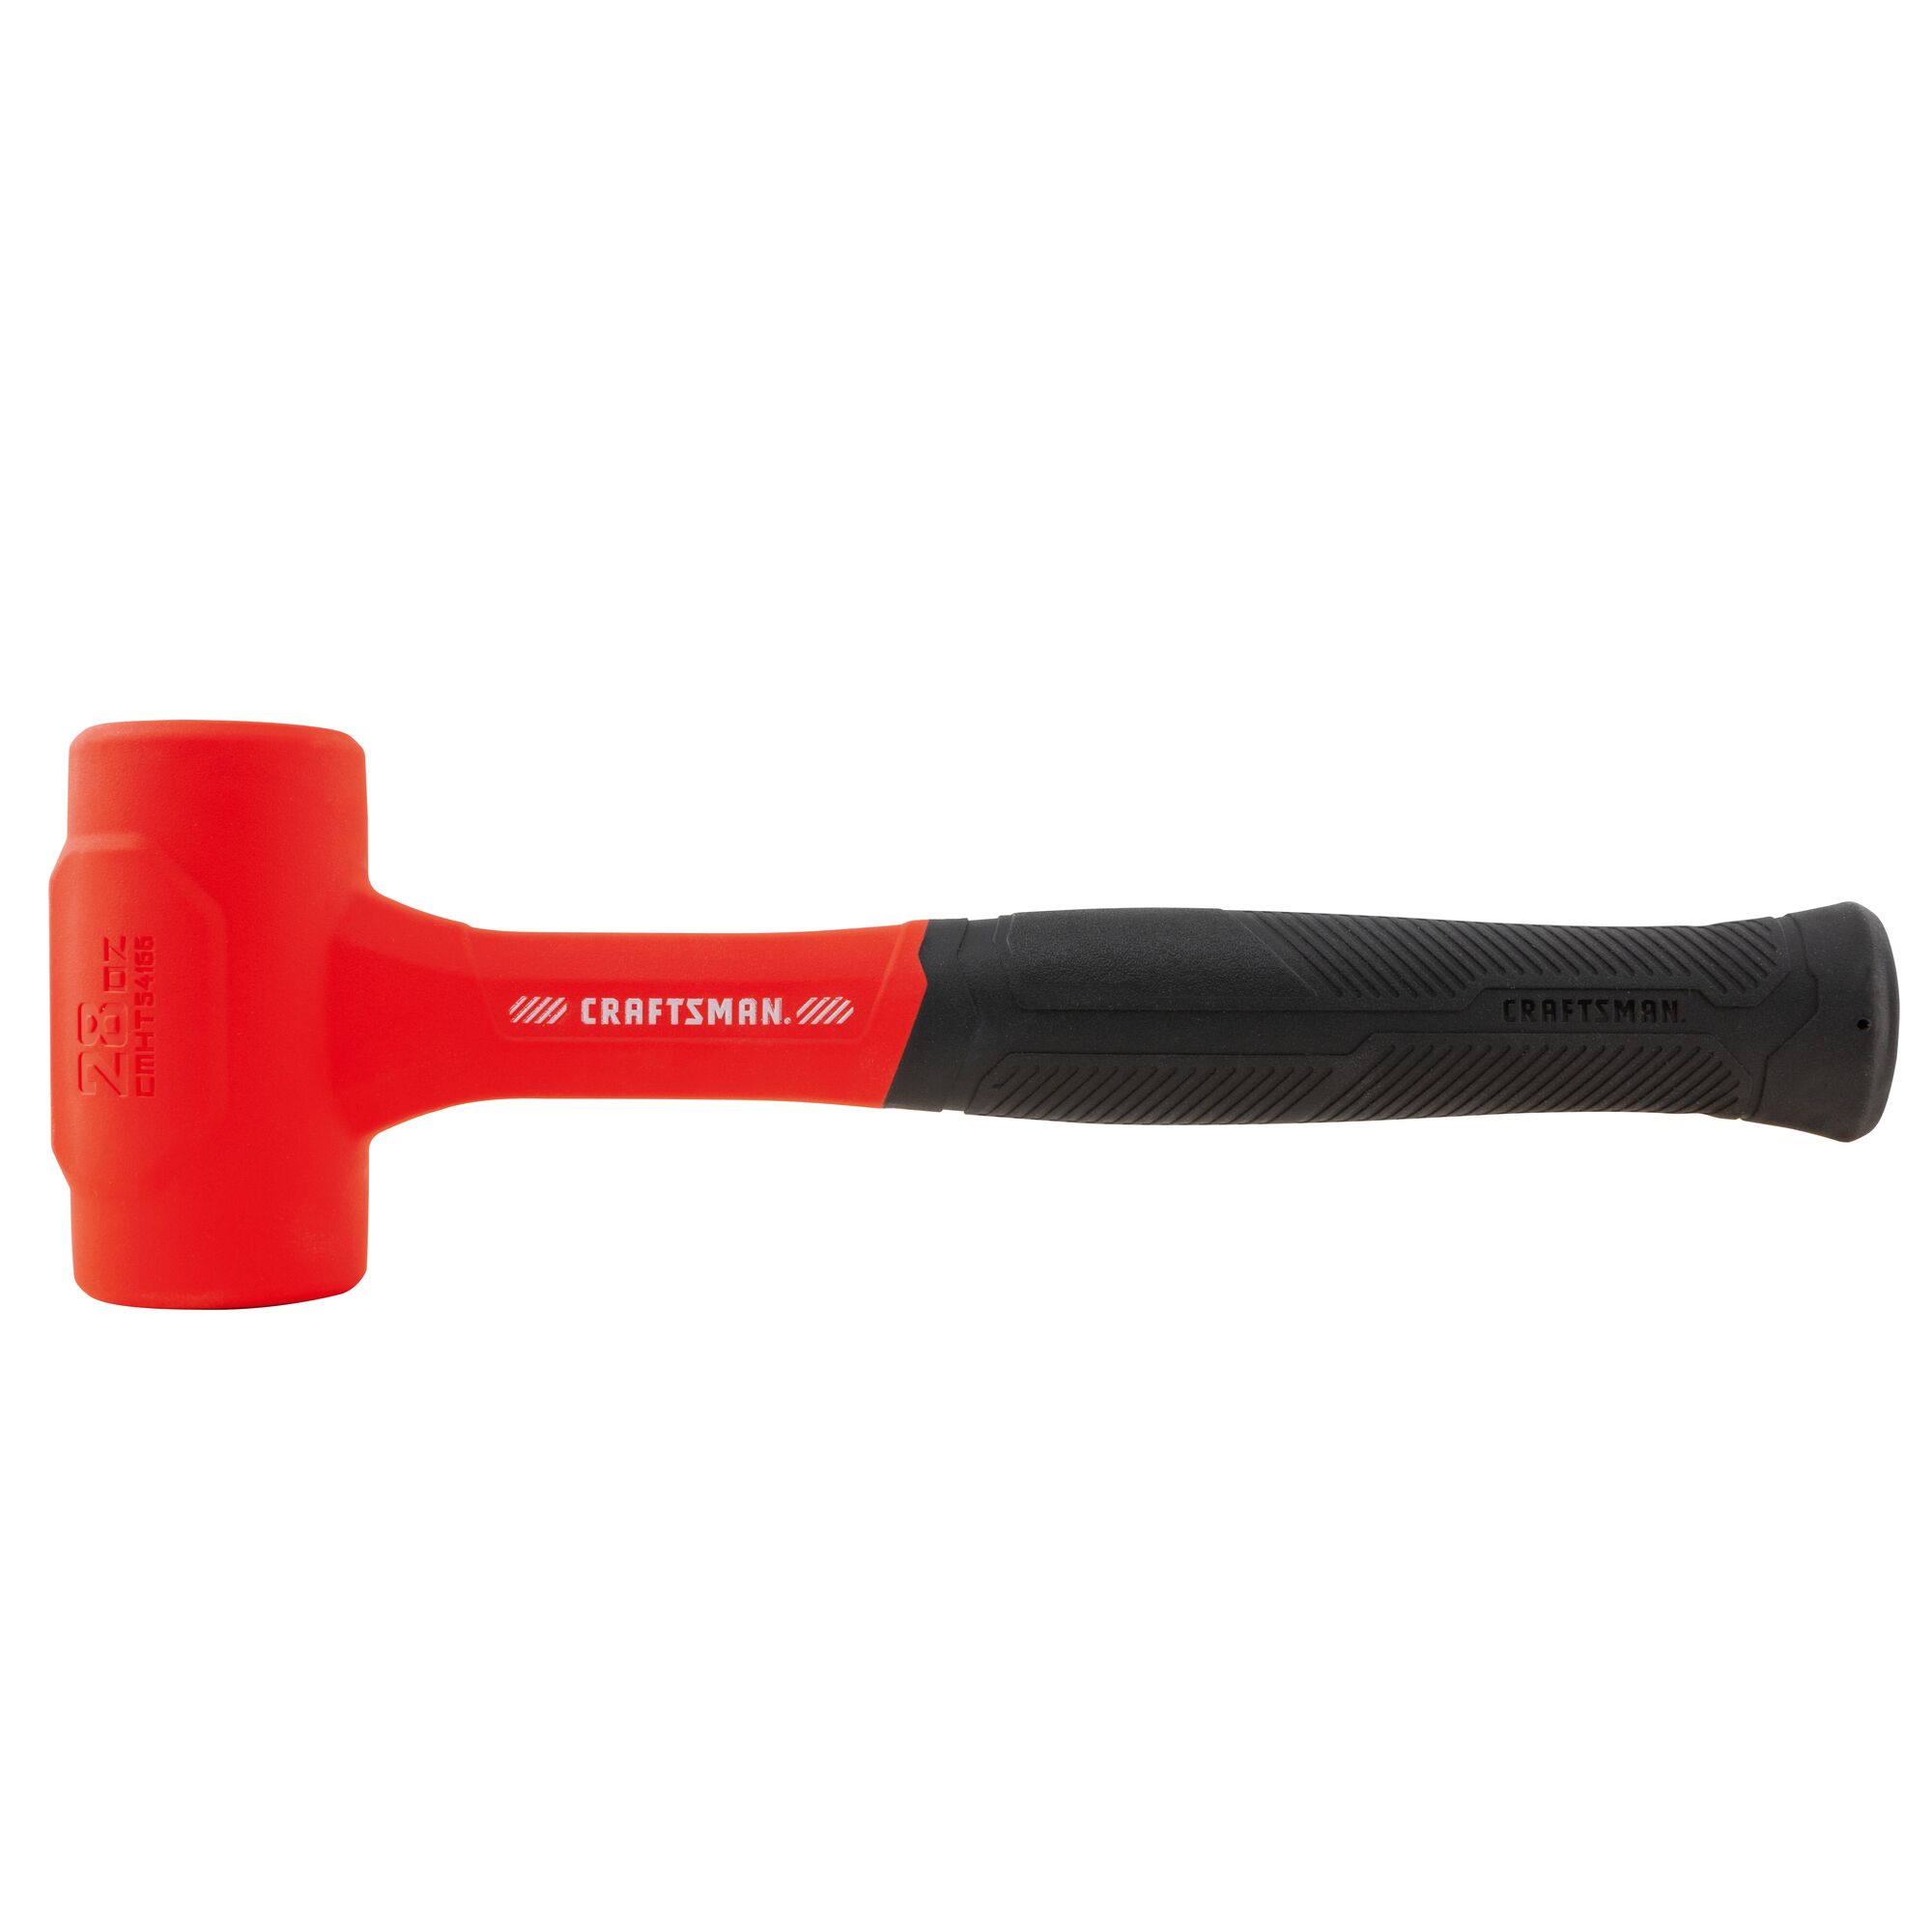 View of CRAFTSMAN Hammers: Dead Blow Hammers: Compocast on white background